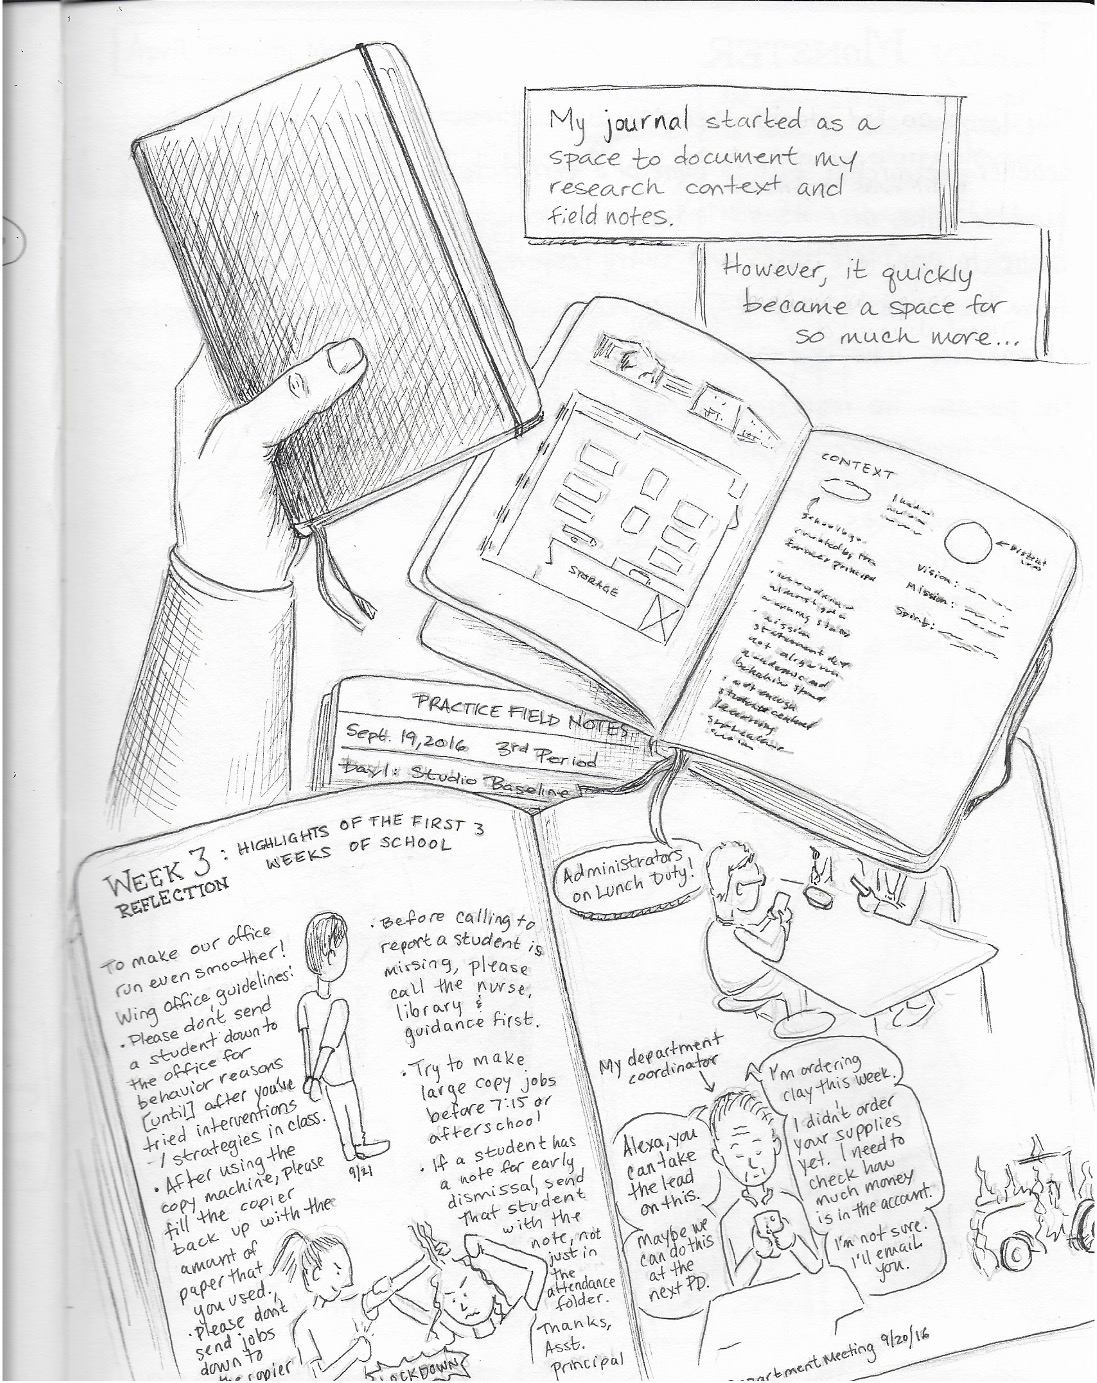 Page from Alexa Kulinski journal that includes field notes and reflections